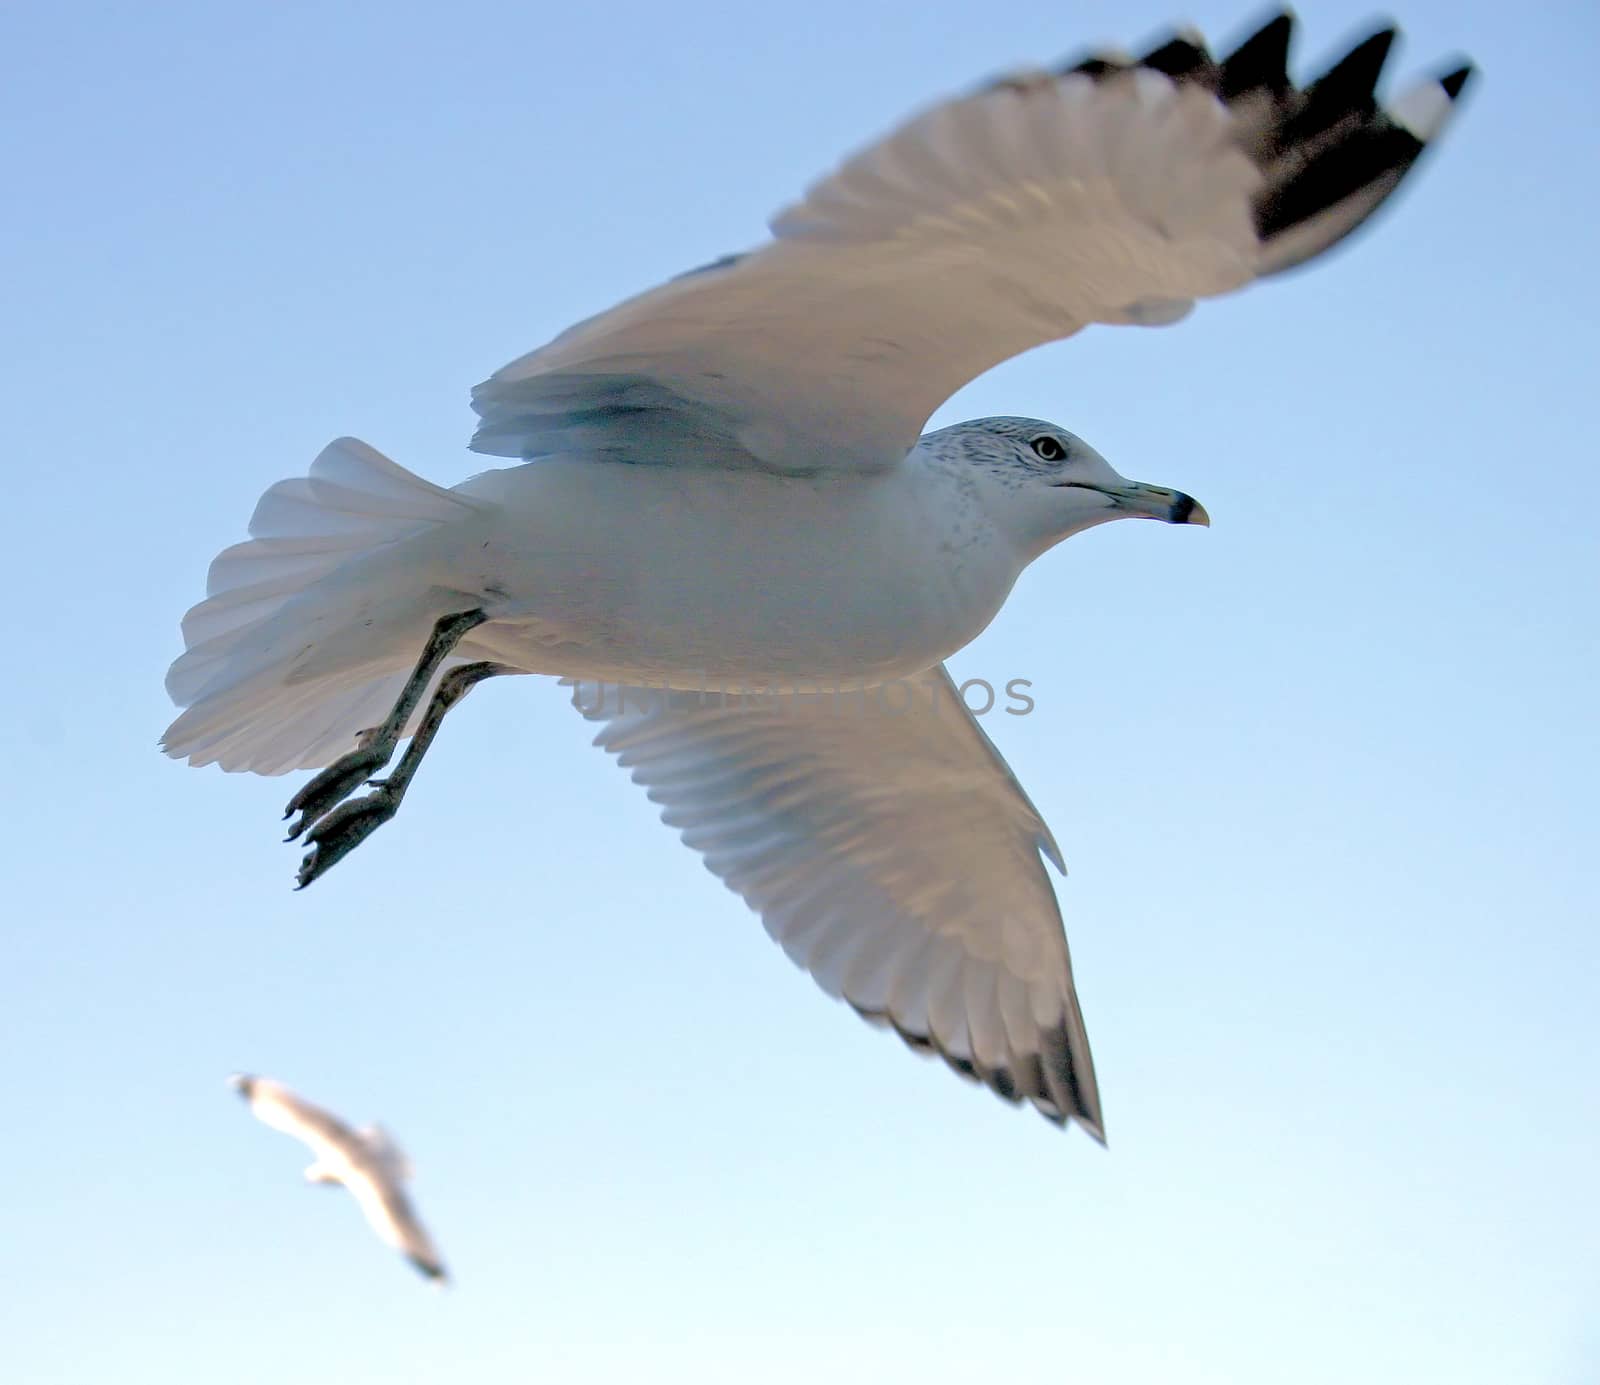 Two seagulls are flying in the sky